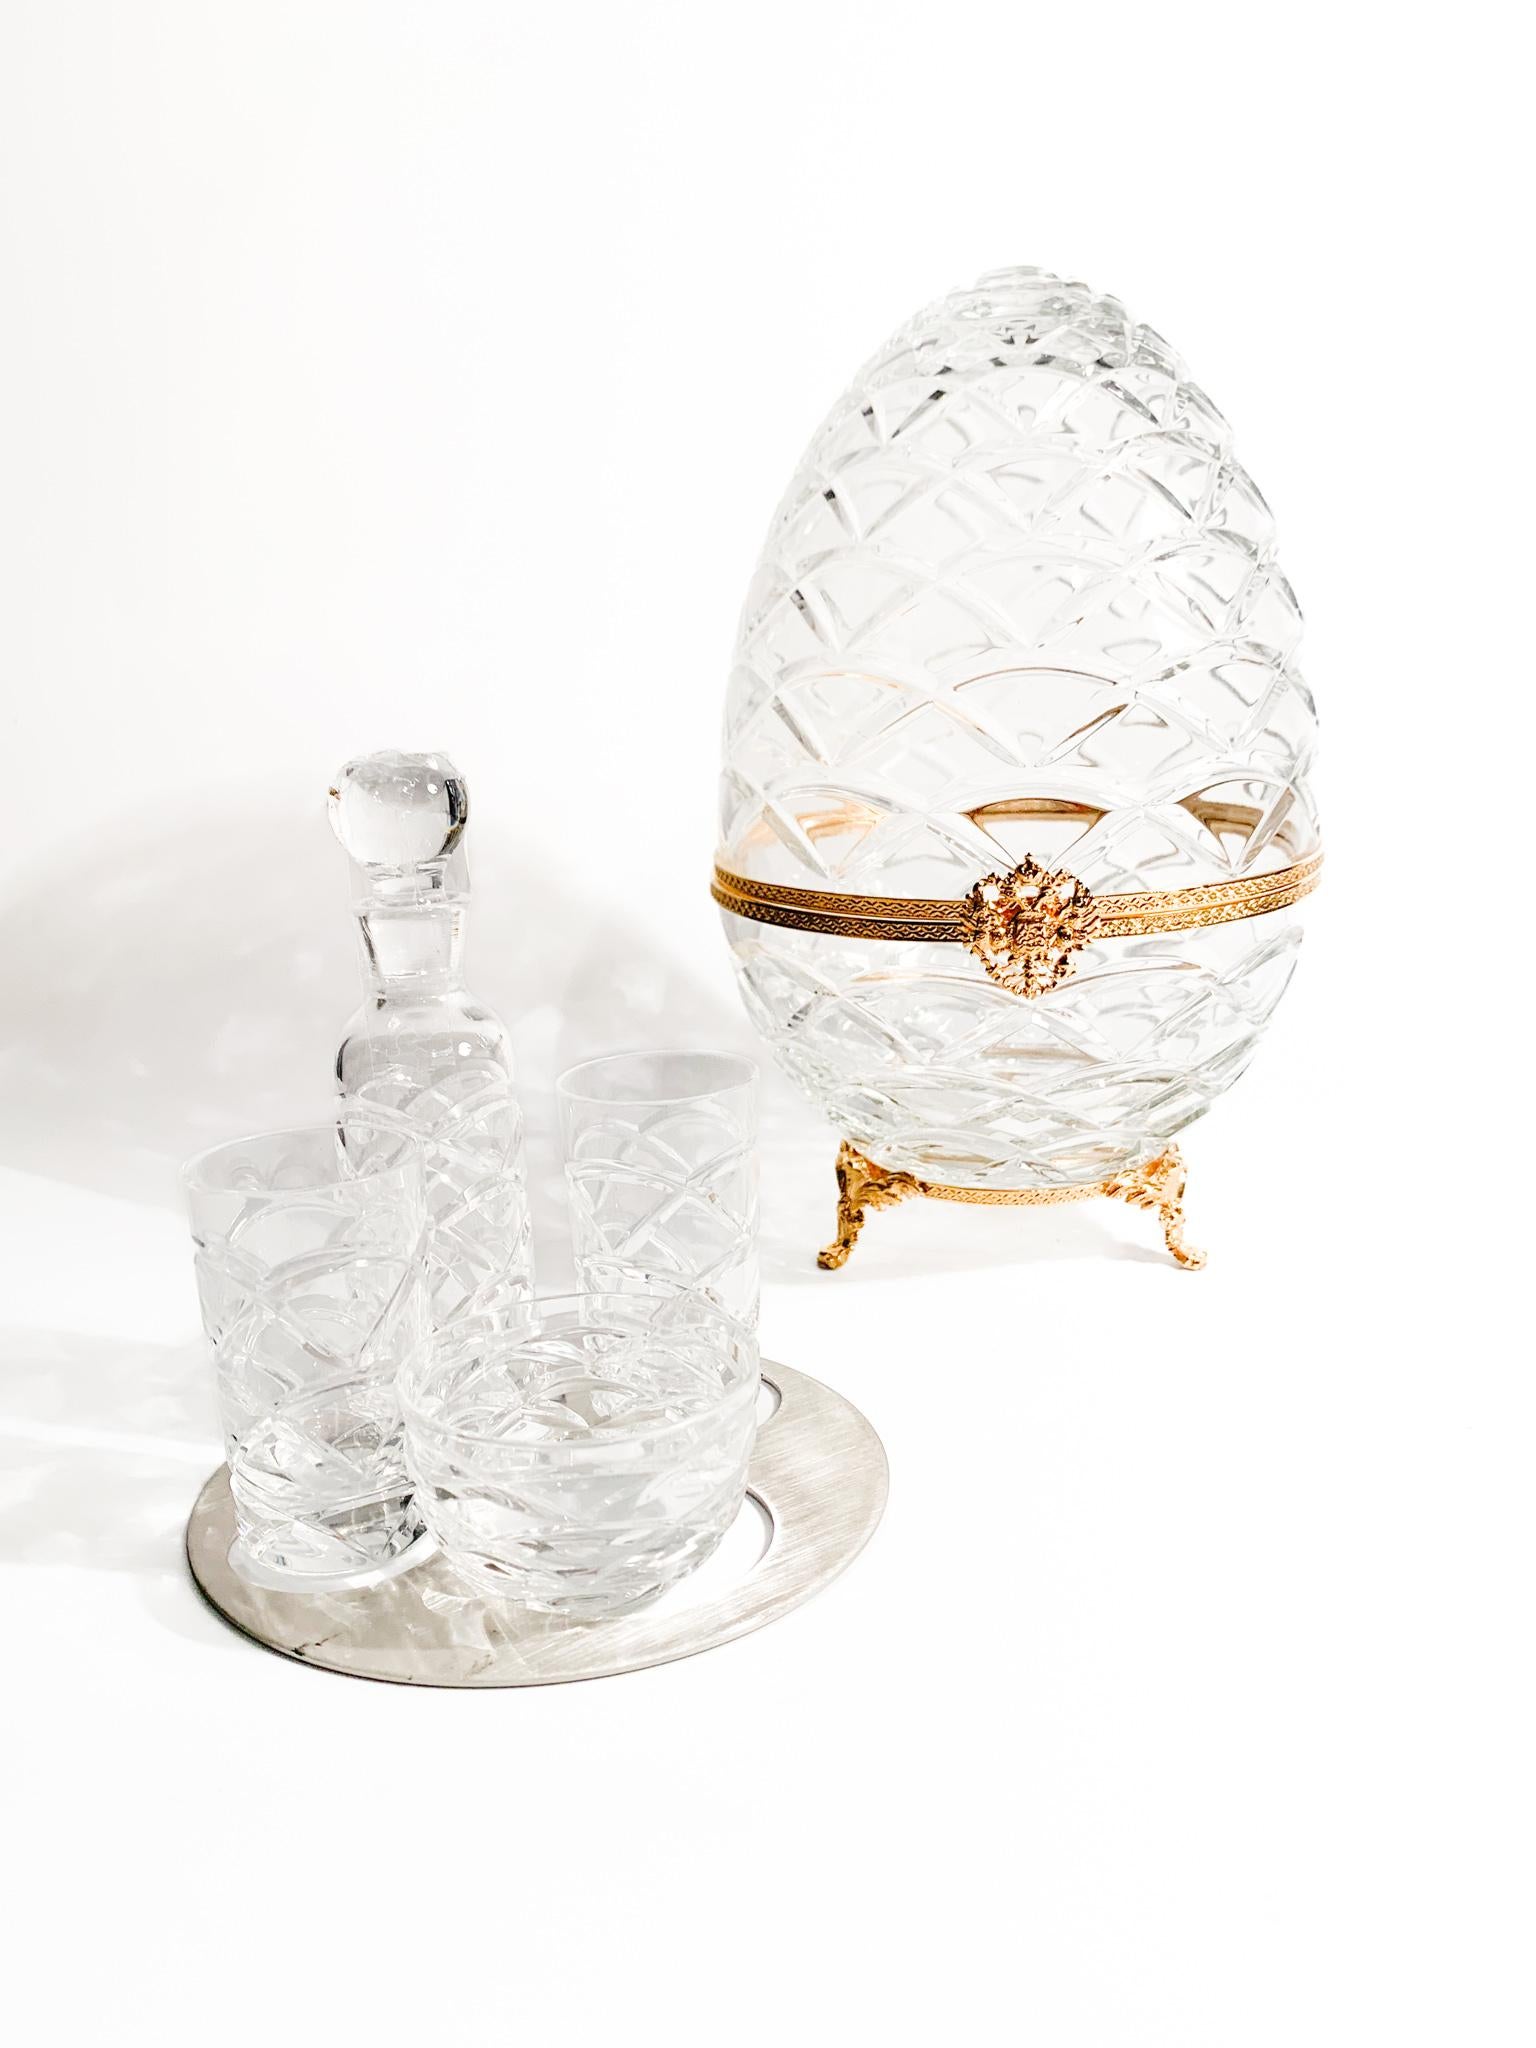 Russian Imperial Vodka and Caviar Set in Fabergé Crystal For Sale